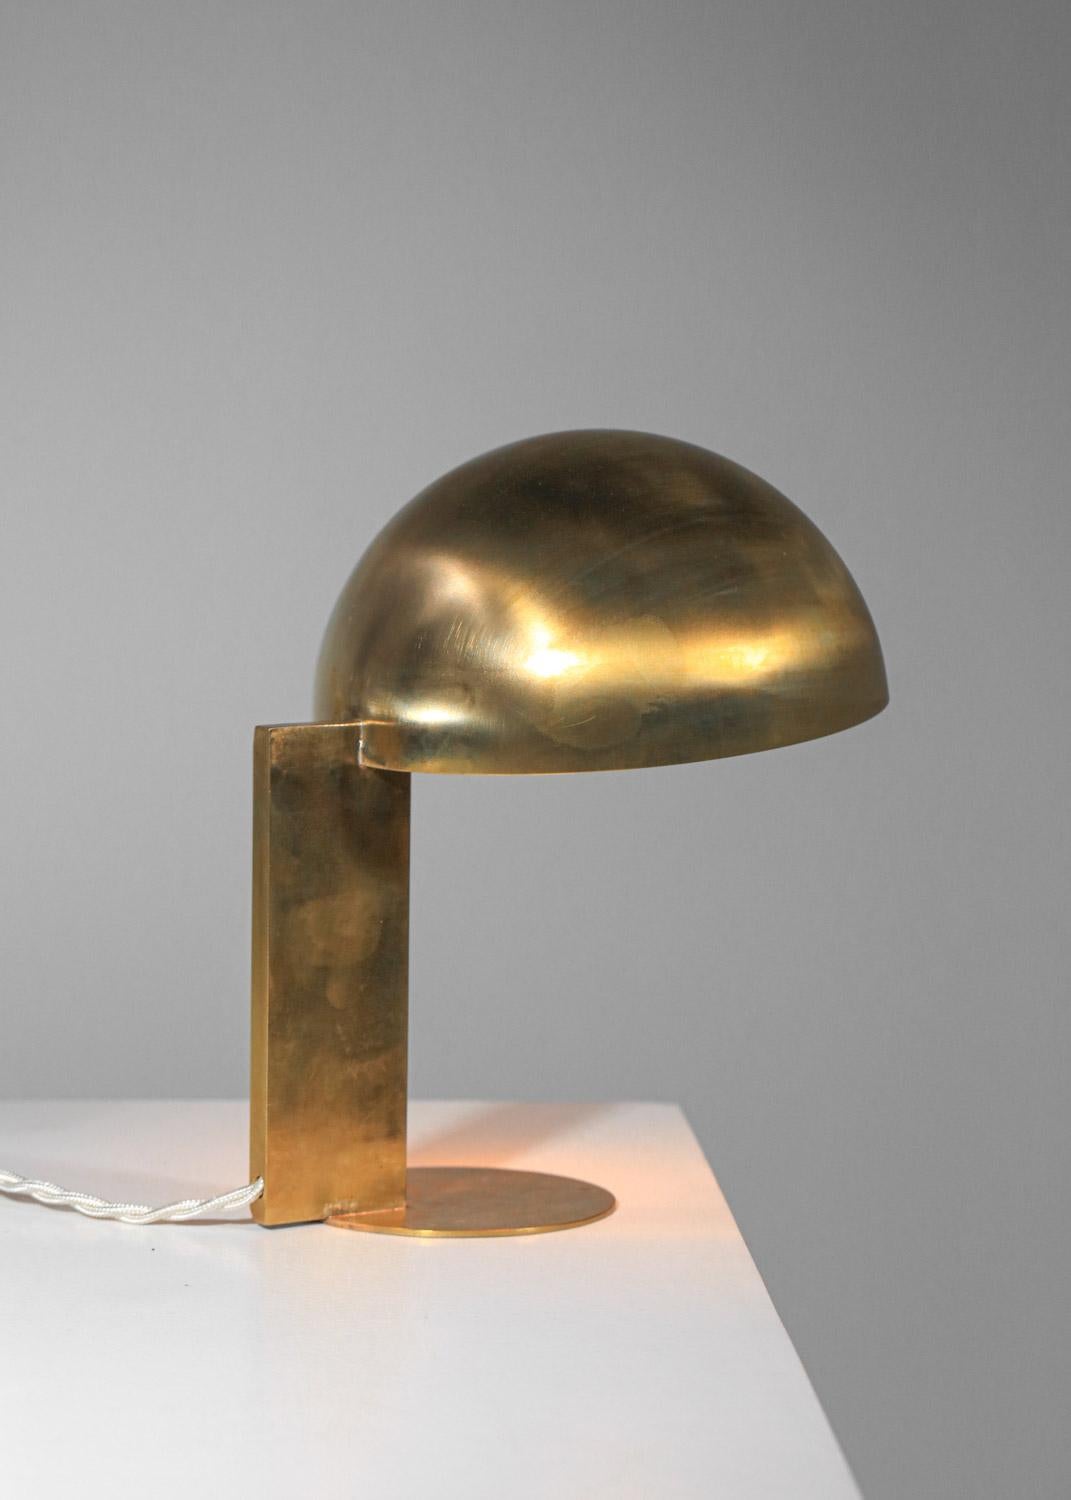 Modern table lamp in solid brass 60's moderniste style by Danke studio  For Sale 5